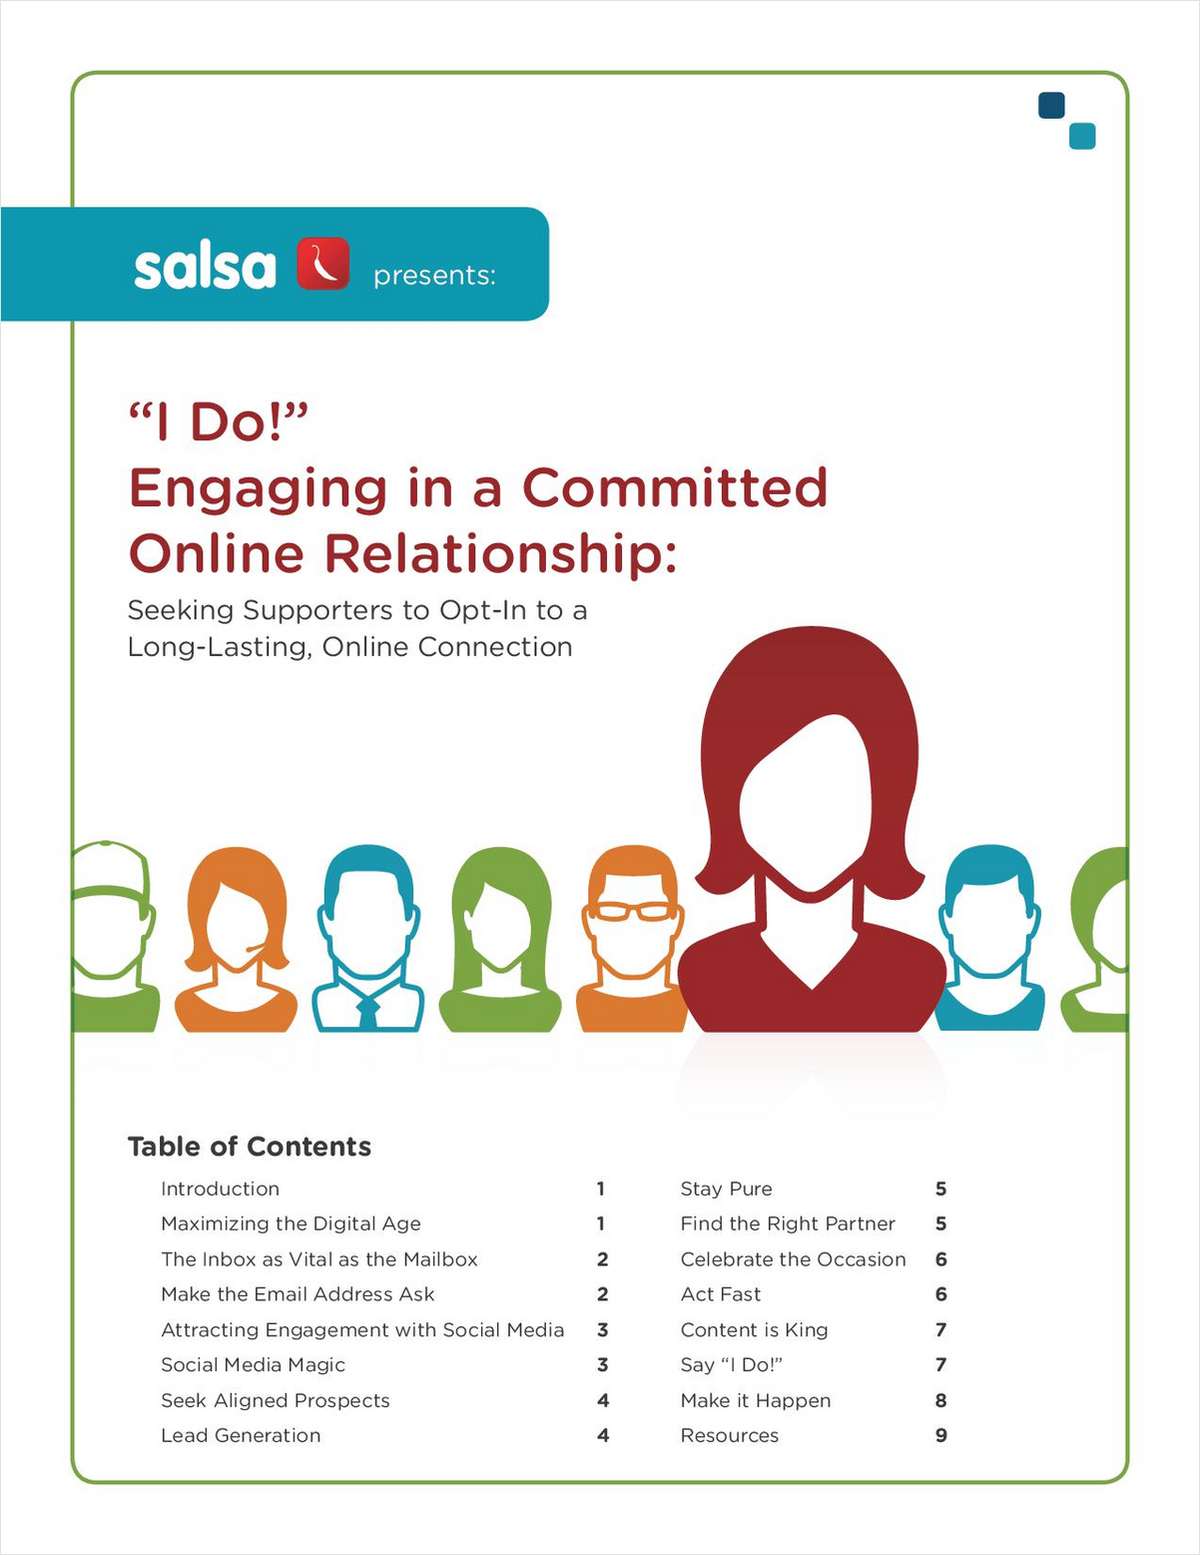 'I Do!' Engaging in a Committed Online Relationship: How to Grow Your Base of Support Online